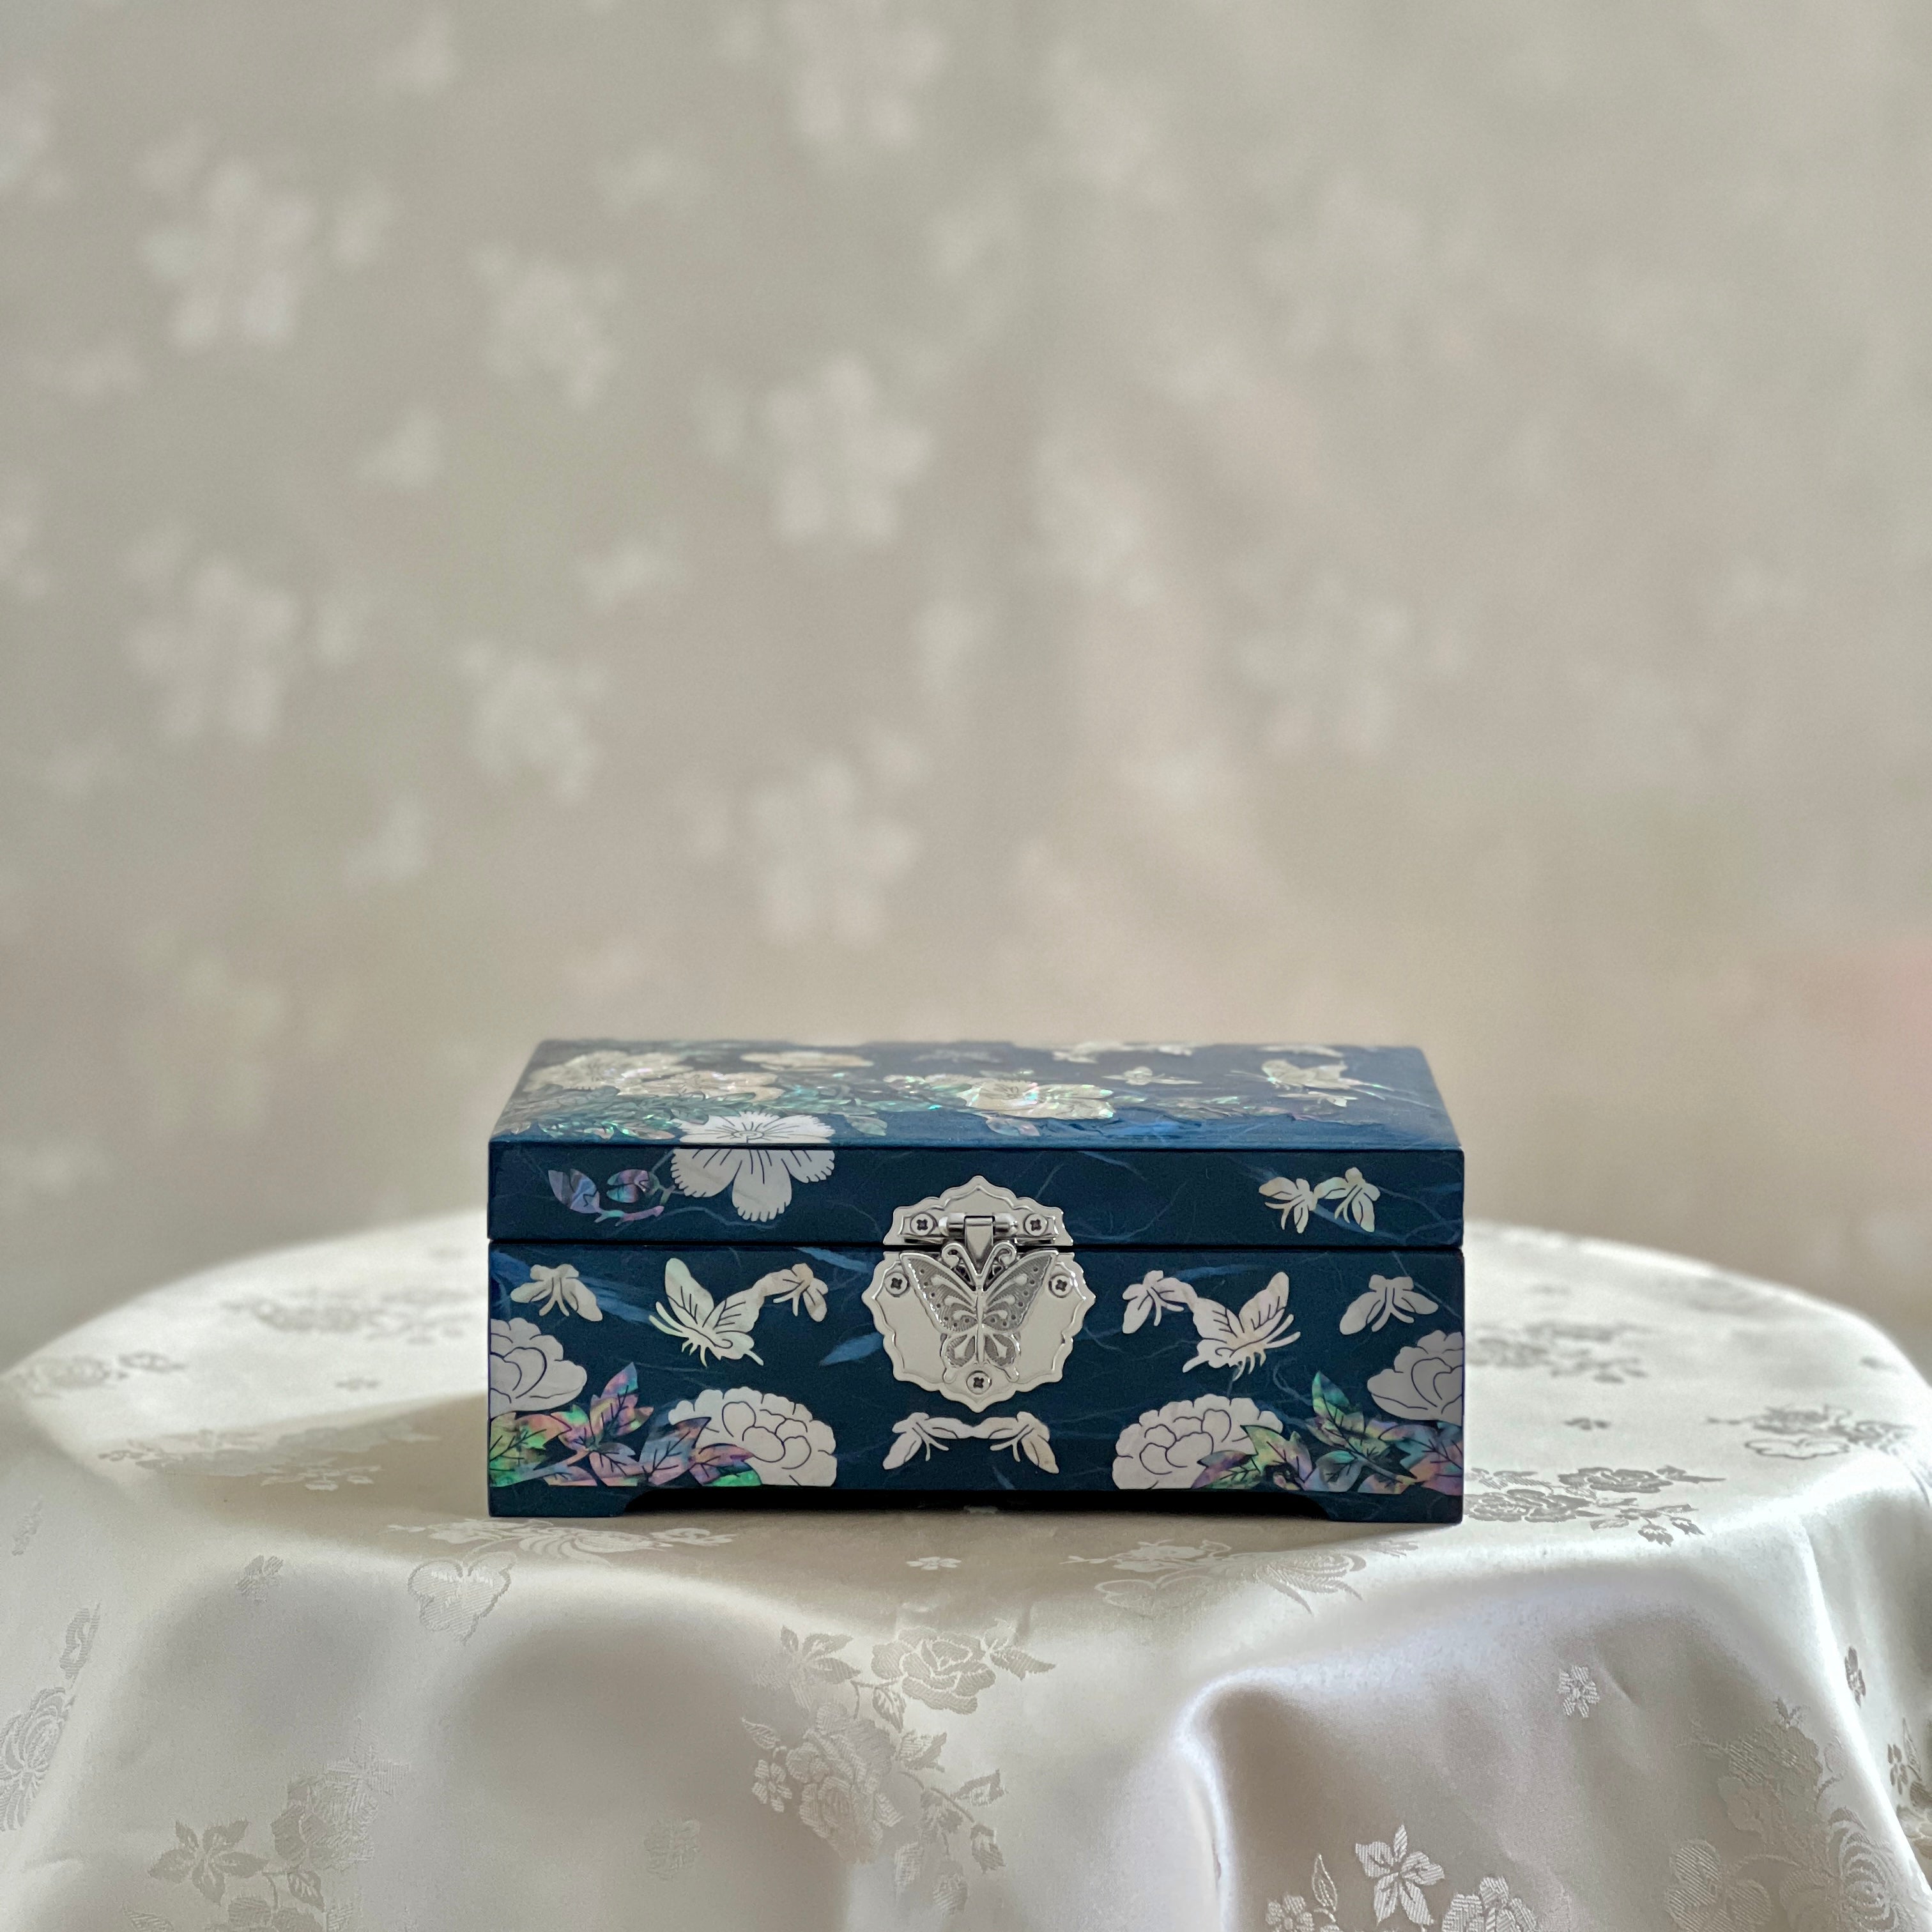 Front view of Handmade Korean mother of pearl jewelry box with crane and pine pattern on navy paper-layered design, perfect for storing valuable jewelry.